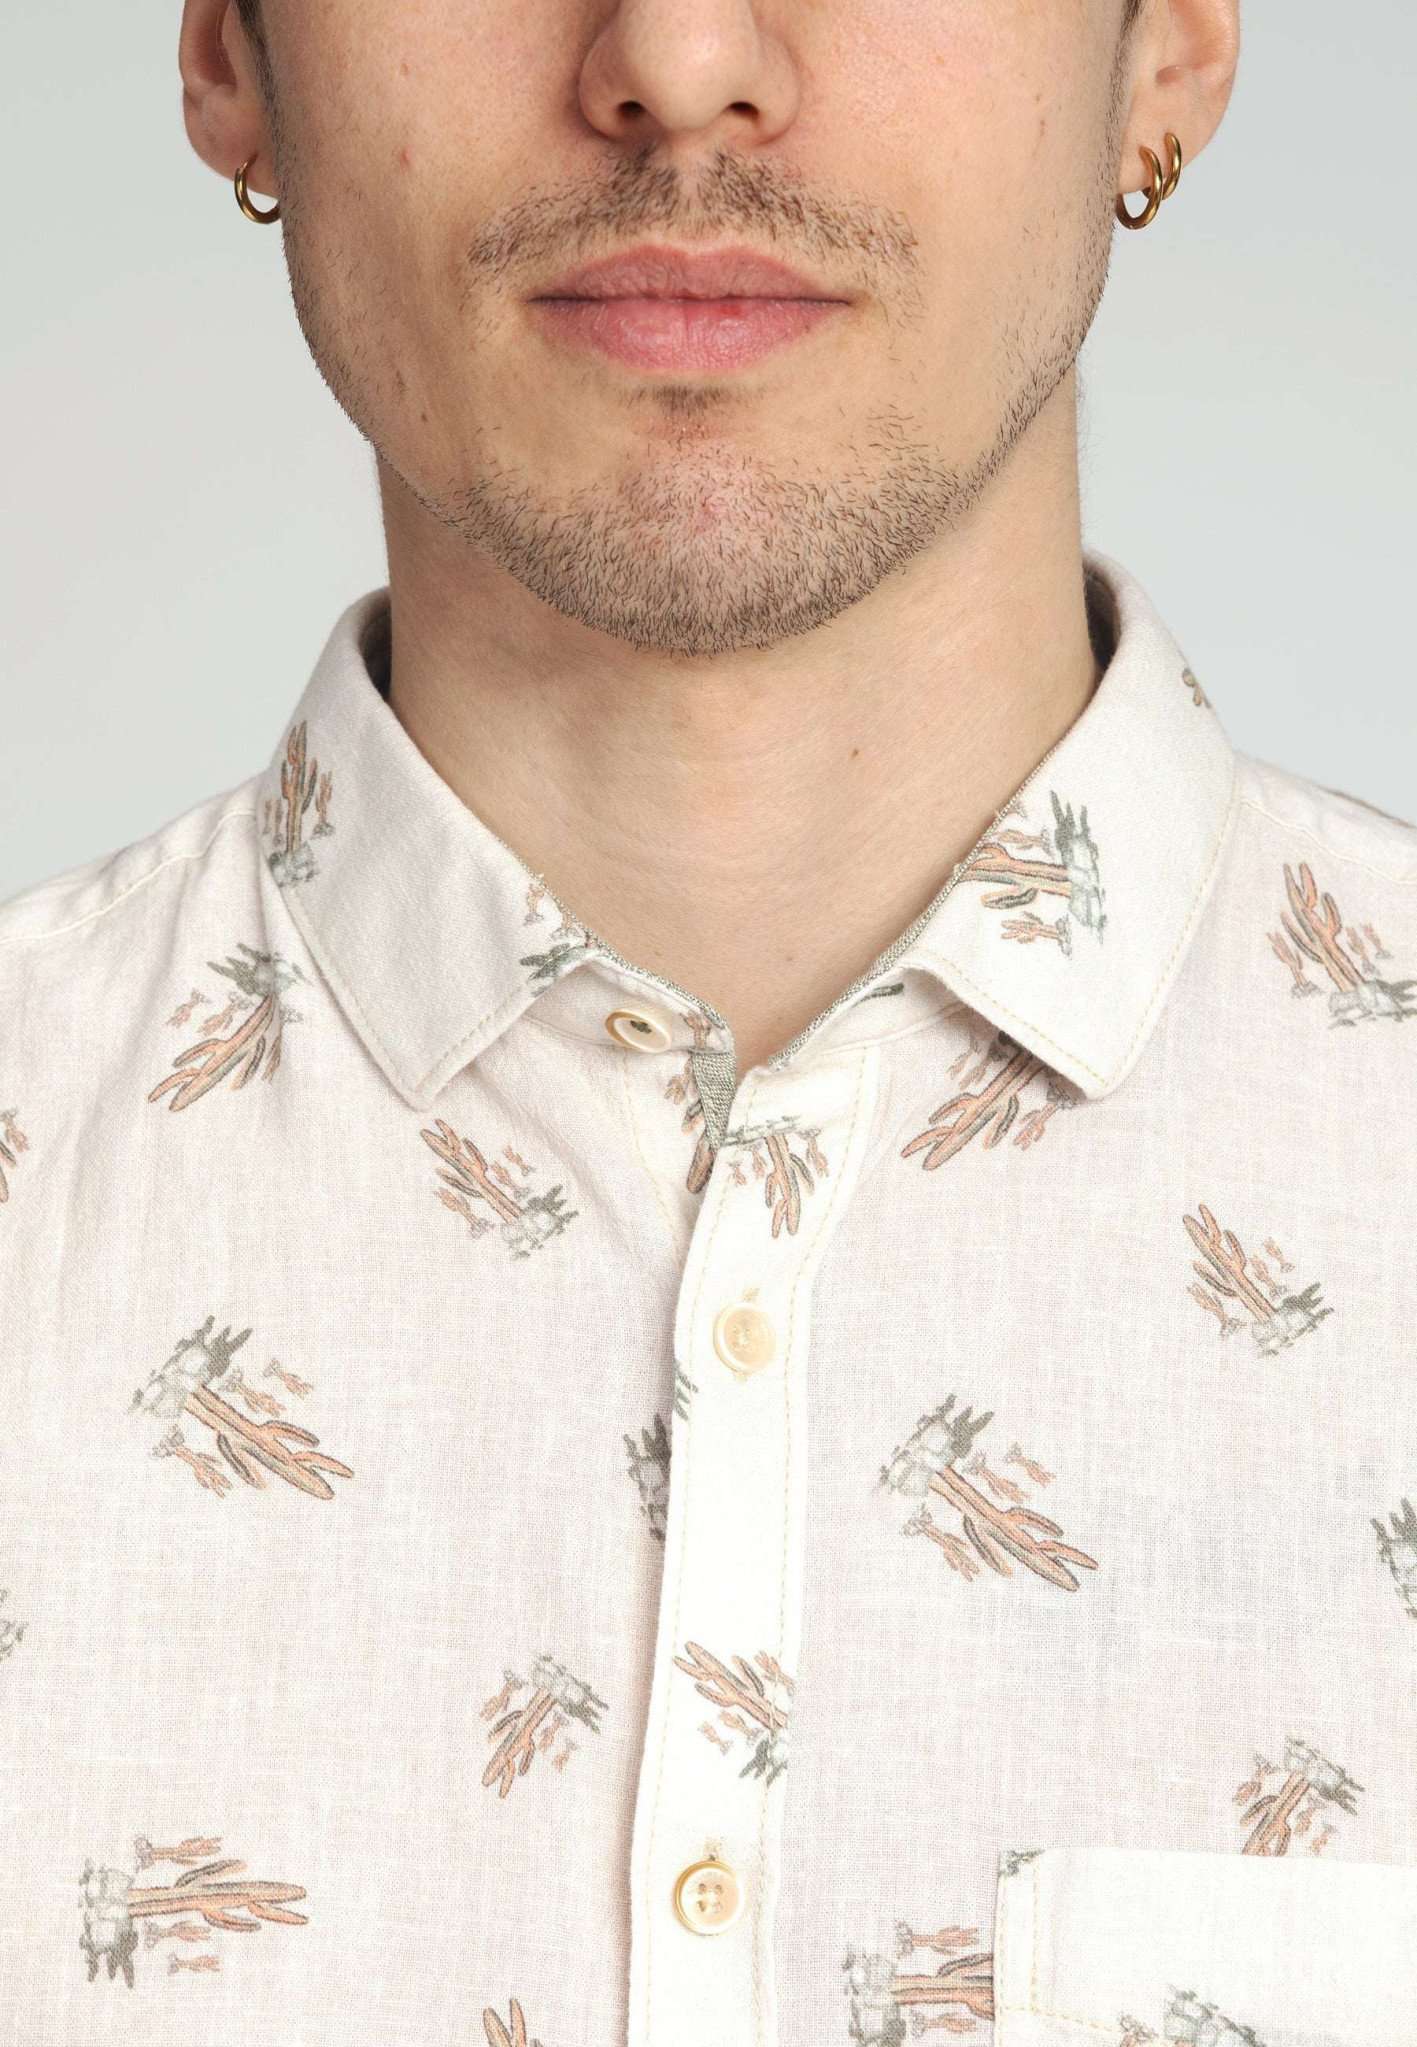 Shirt Cactus Print in Cactus Hemden Colours and Sons   